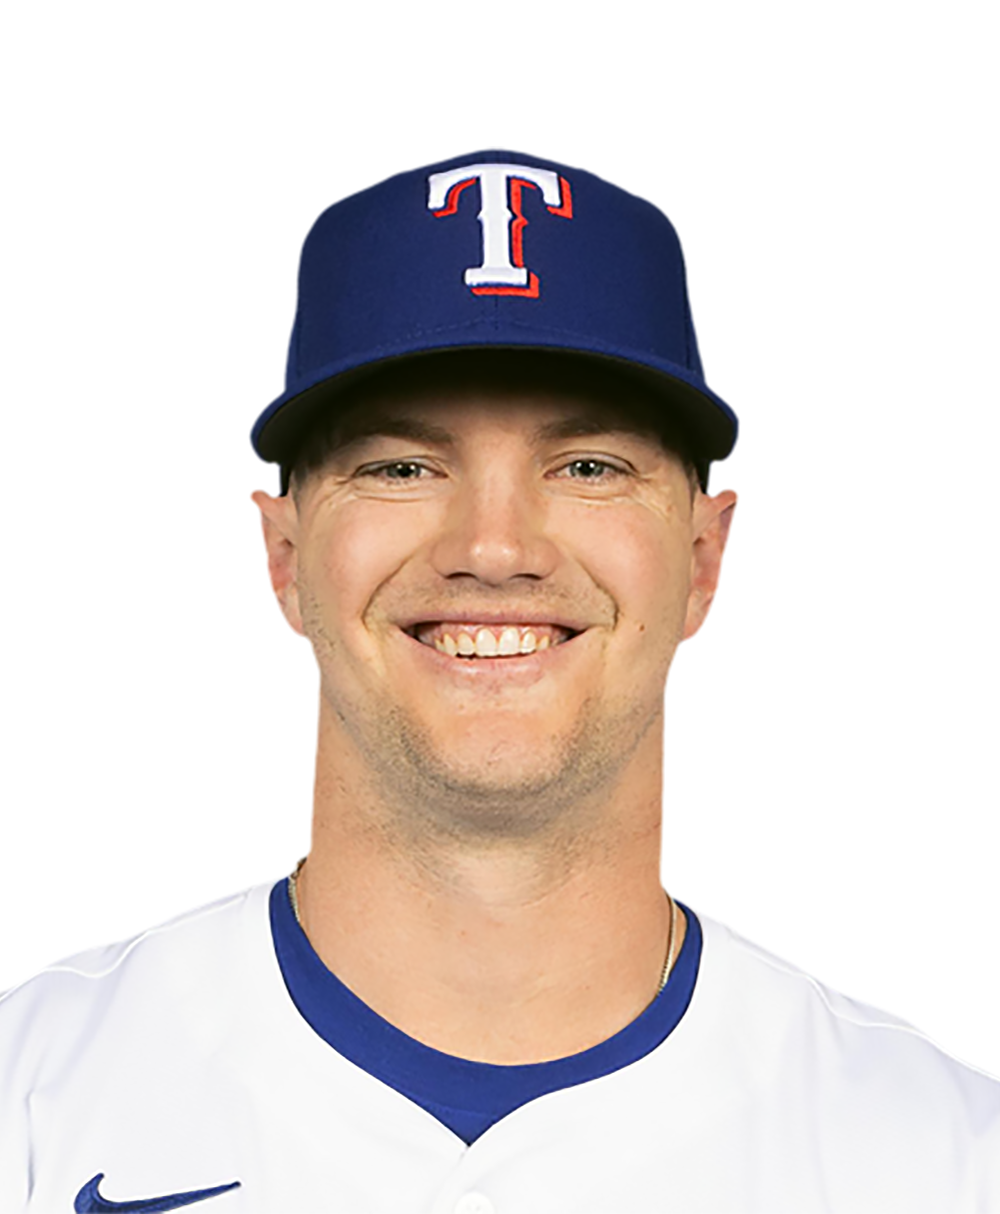 Texas Rangers fans encouraged by positive update on Josh Smith's